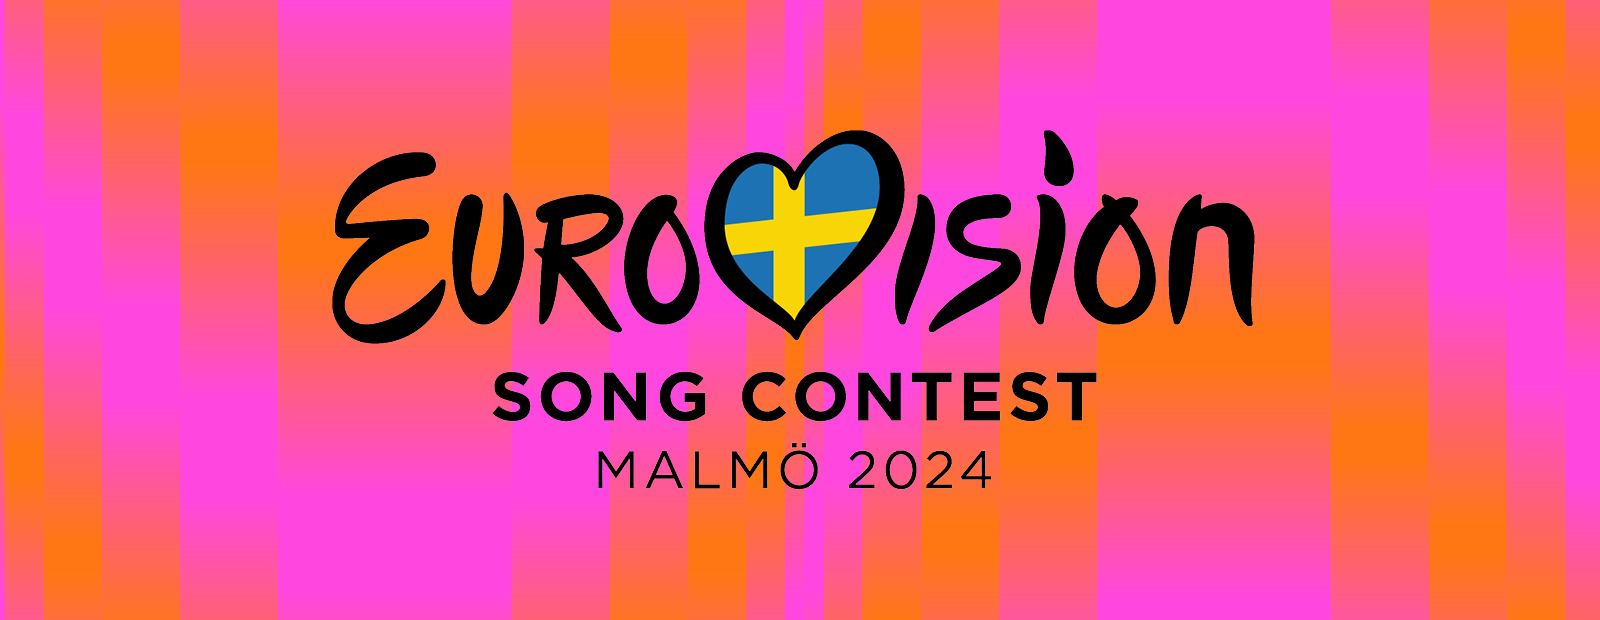 Eurovision Song Contest 2024 Semifinal 1 Live Show